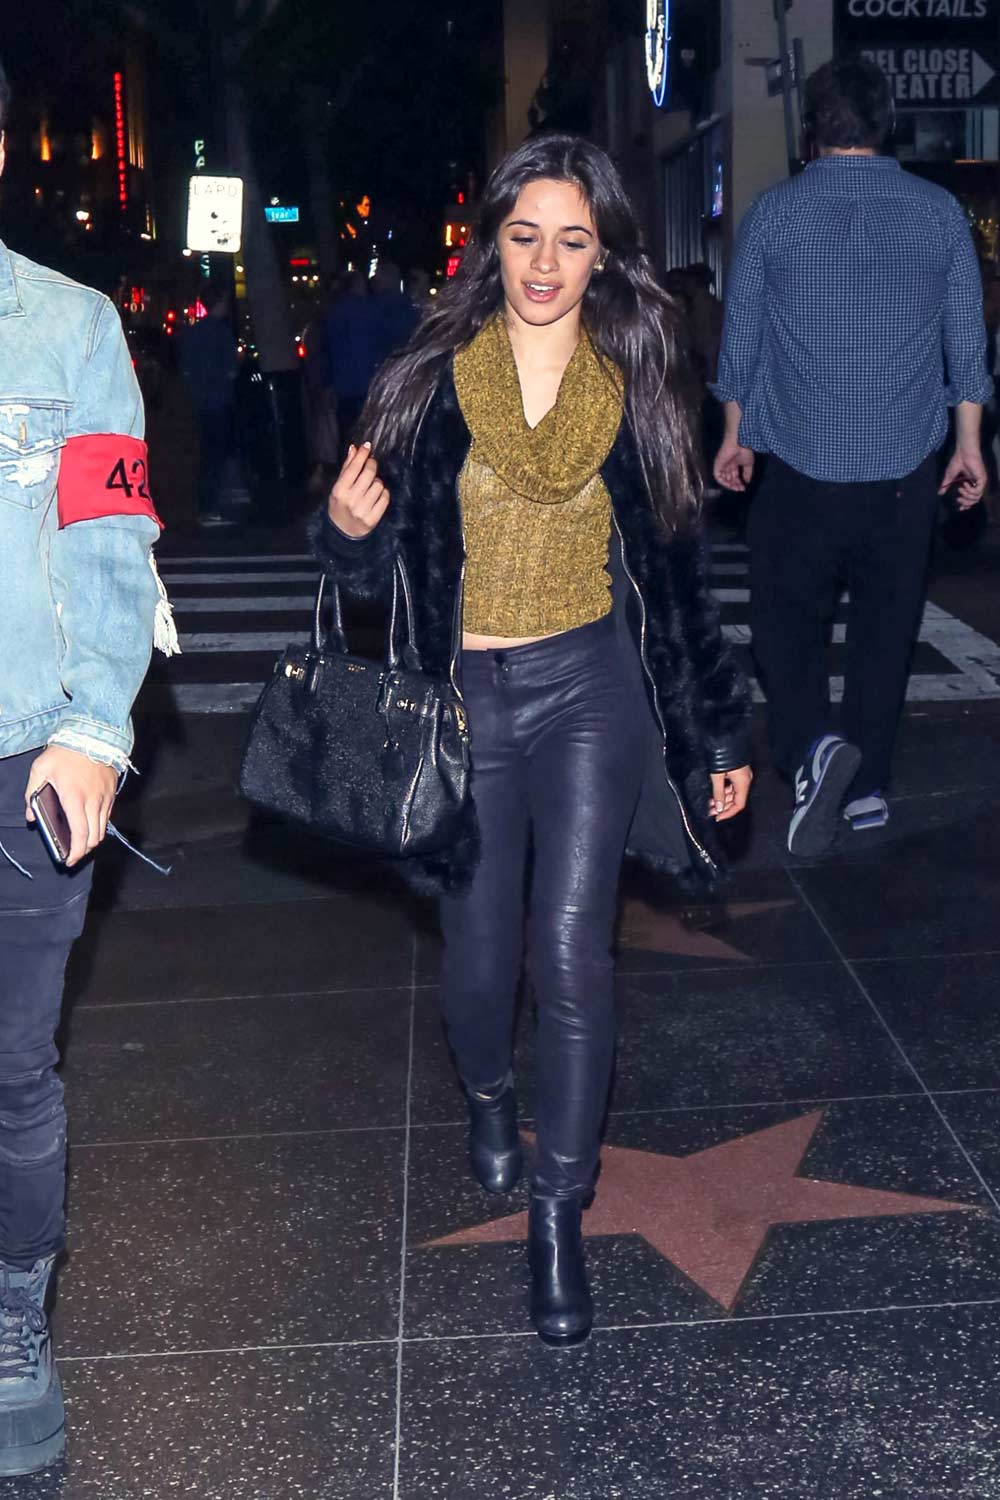 Camila Cabello out and about in LA